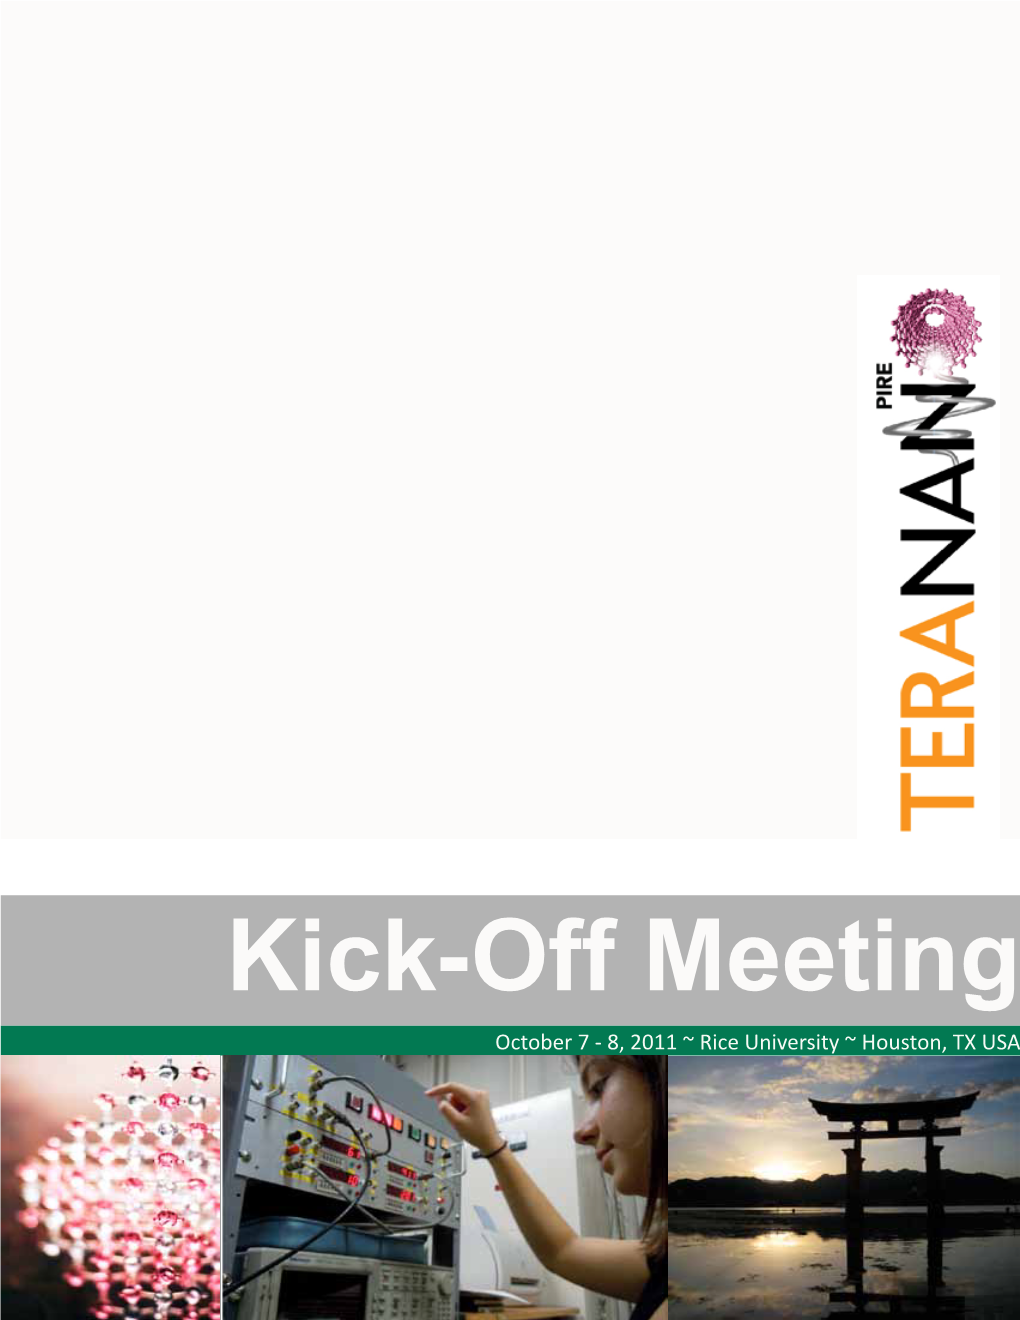 Kick-Off Meeting Schedule & Abstract Book